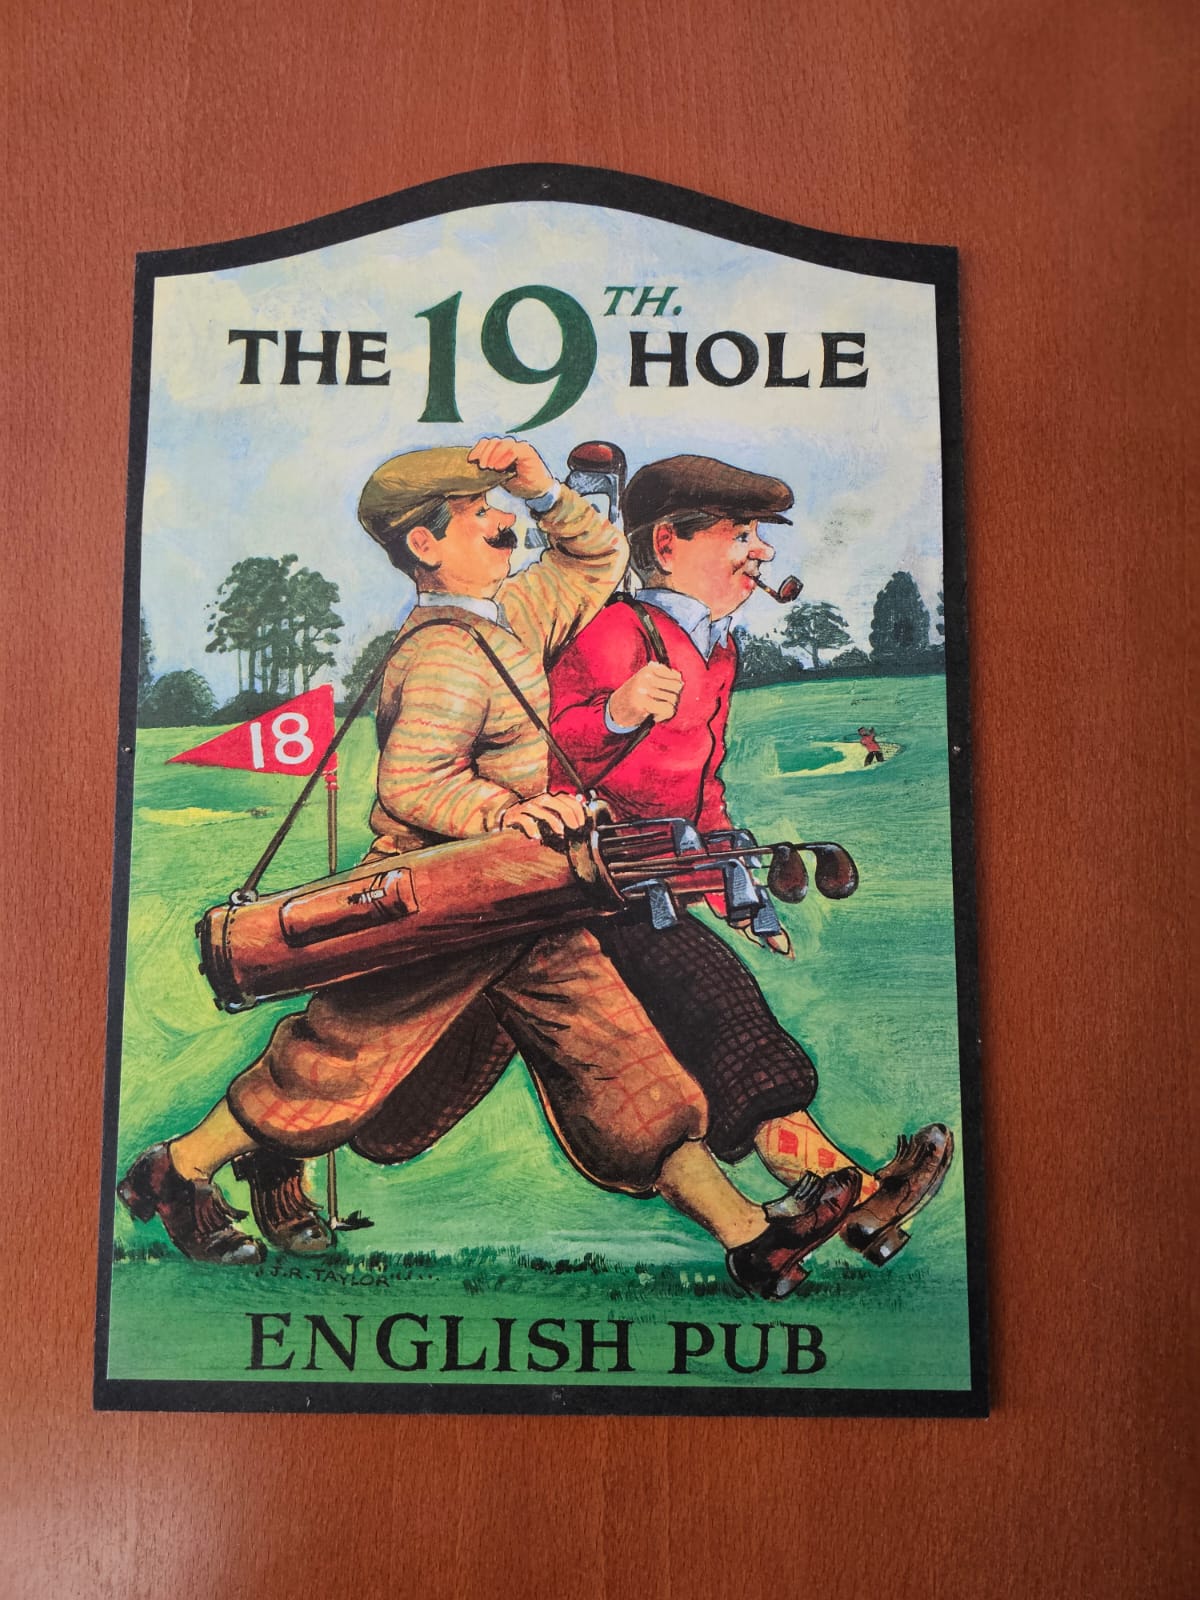 Hauson Realty - Cyprus Real Estate Agents The 19 hole english pub sign.